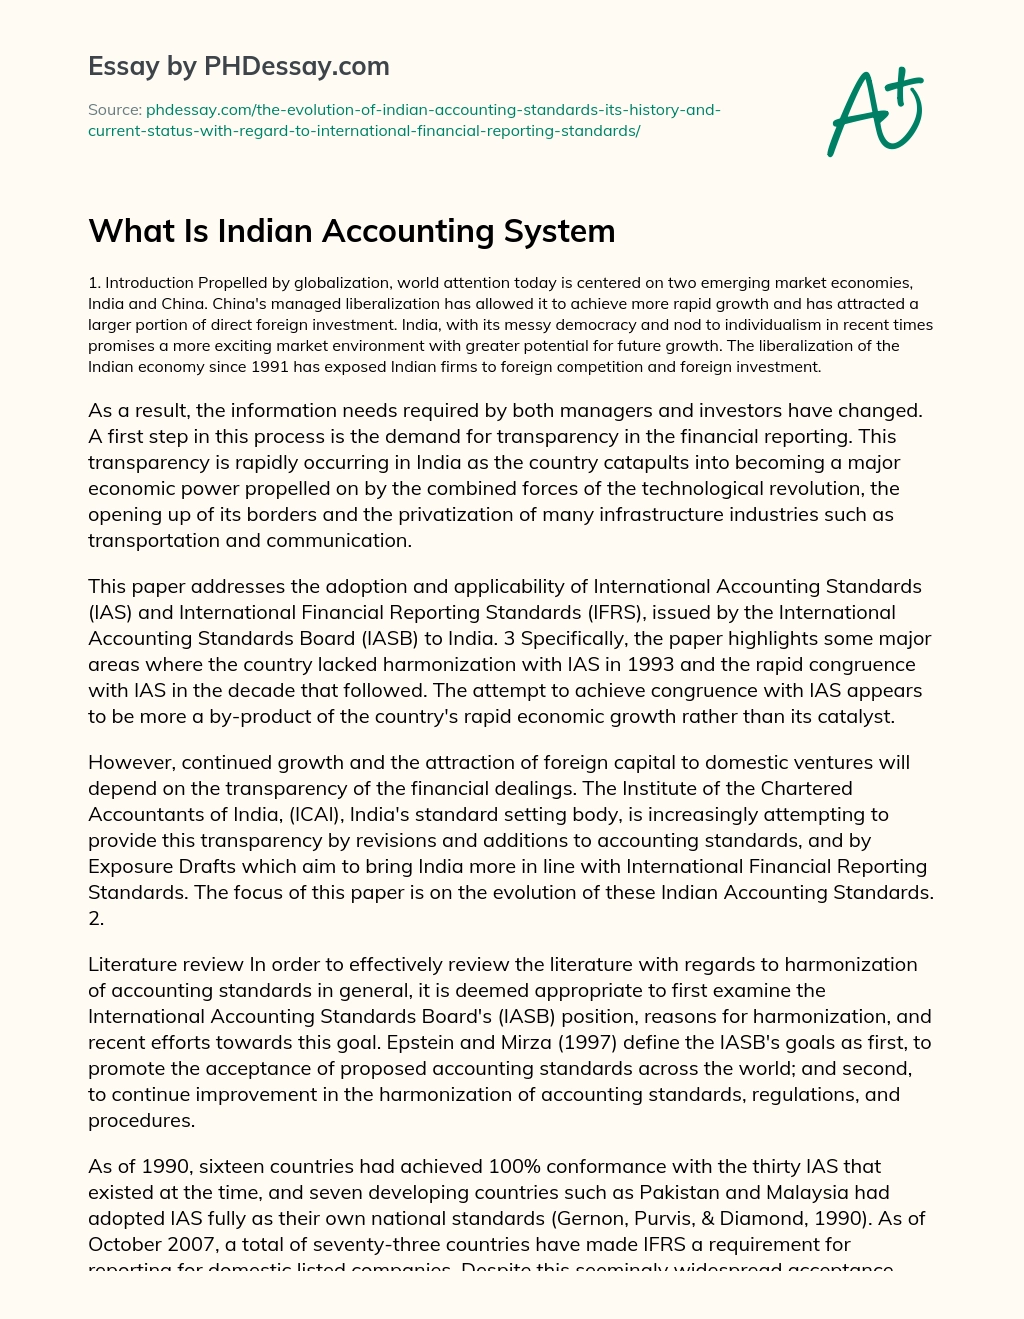 What Is Indian Accounting System essay